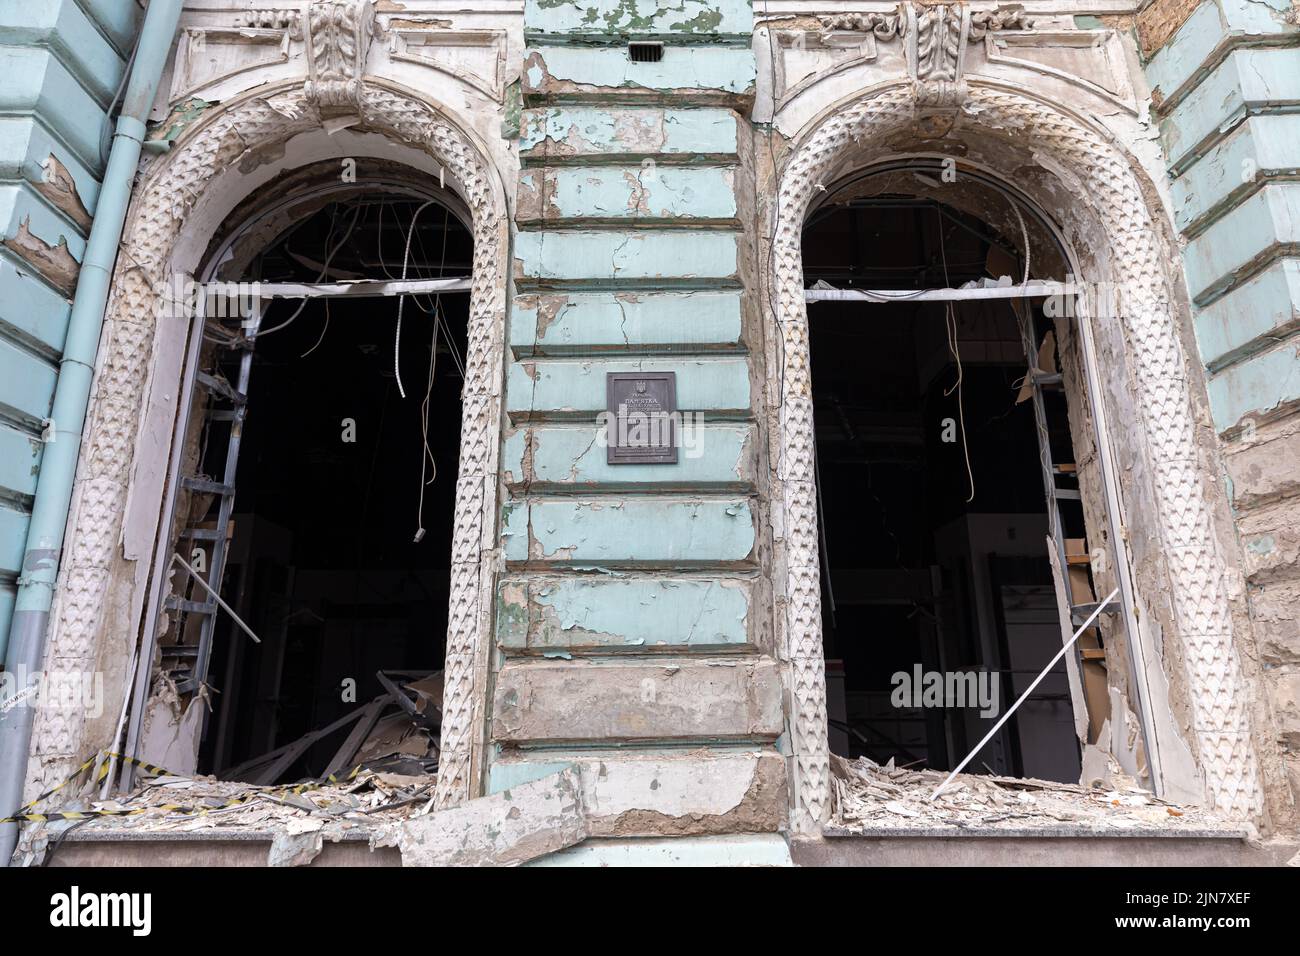 Kharkiv, Ukraine. 01st Aug, 2022. Damaged architectural monument of the city of Kharkiv. A commemorative plaque about the architectural value of the building is seen on the wall as well as broken windows due to Russian shelling in Kharkiv. (Photo by Mykhaylo Palinchak/SOPA Images/Sipa USA) Credit: Sipa USA/Alamy Live News Stock Photo